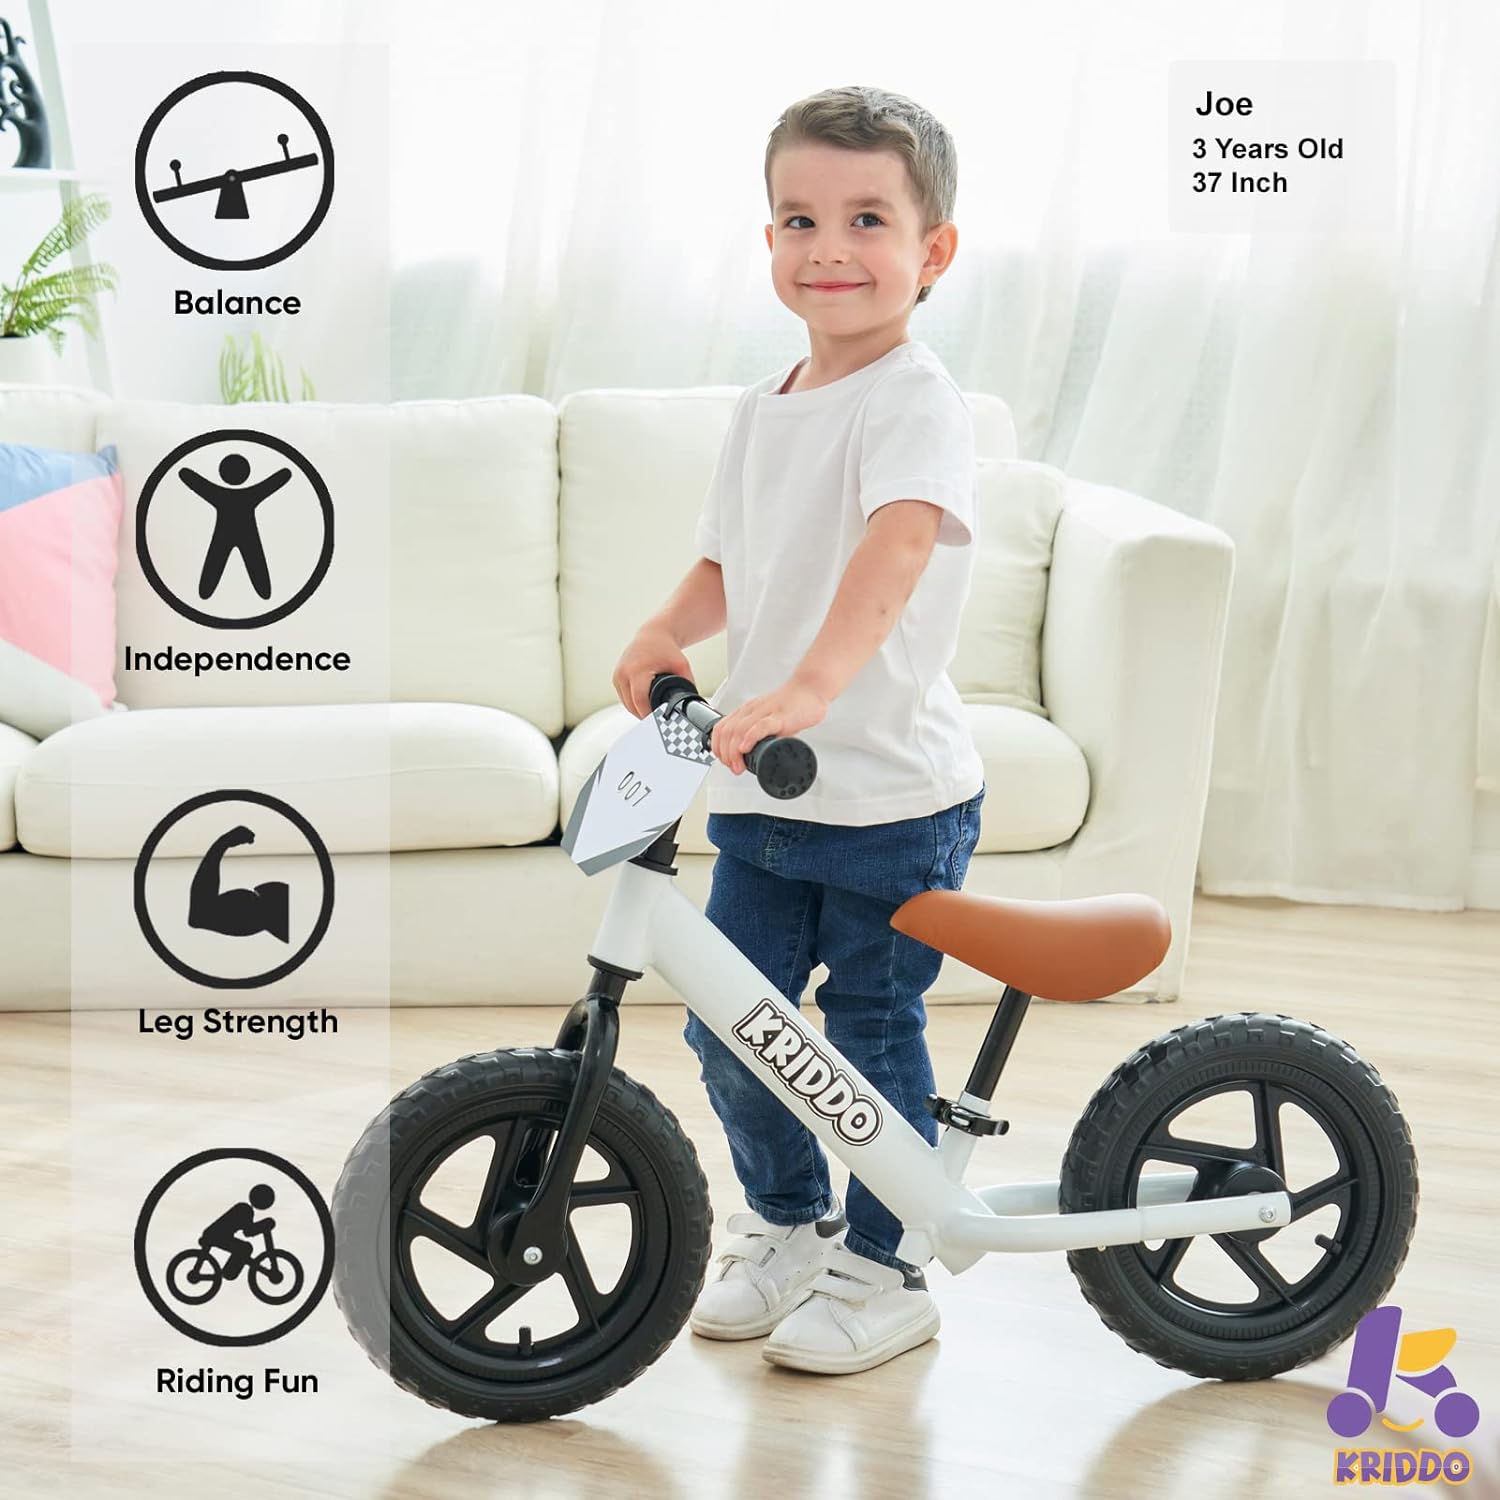 KRIDDO Toddler Balance Bike 2 Year Old, Age 24 Months to 5 Years Old, 12 Inch Push Bicycle with Customize Plate (3 Sets of Stickers Included), Steady Balancing, Gift Bike for 2-3 Boys Girls